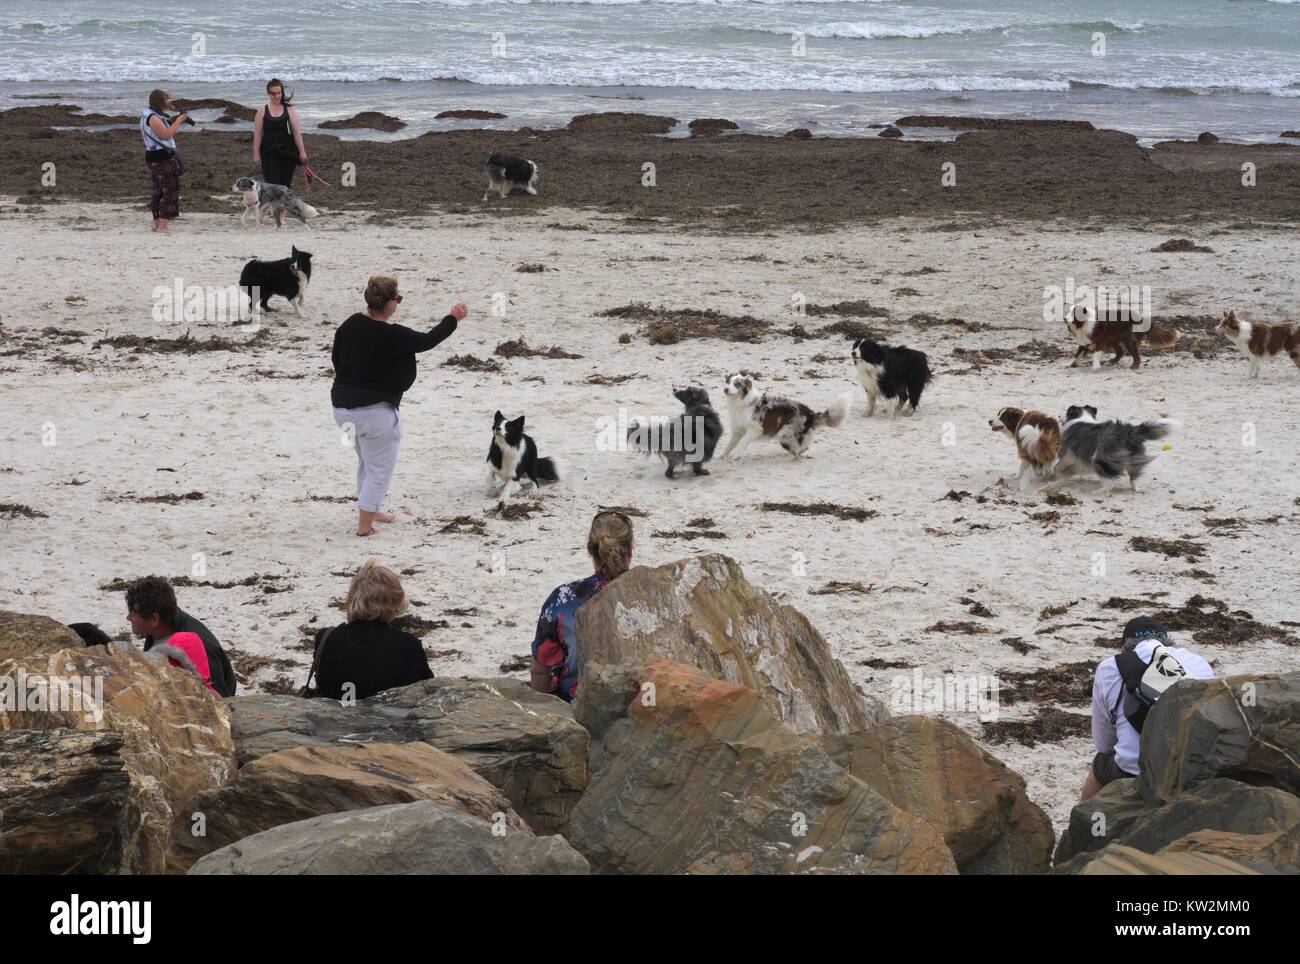 A group of border collies and their owners meet on a windswept beach. Stock Photo